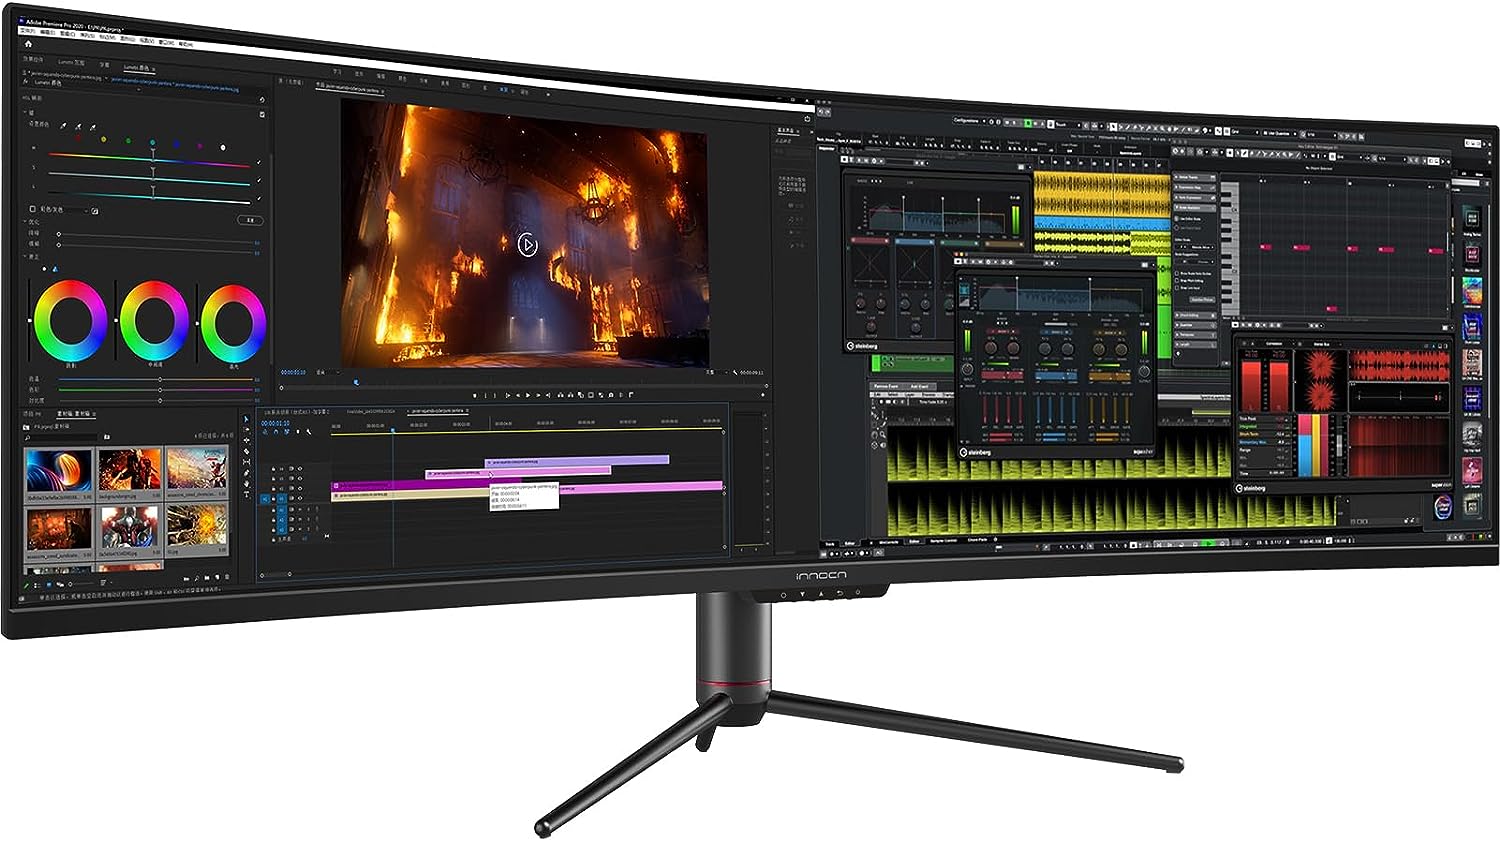 INNOCN 49 Ultrawide Curved Computer Monitor - 49C1G